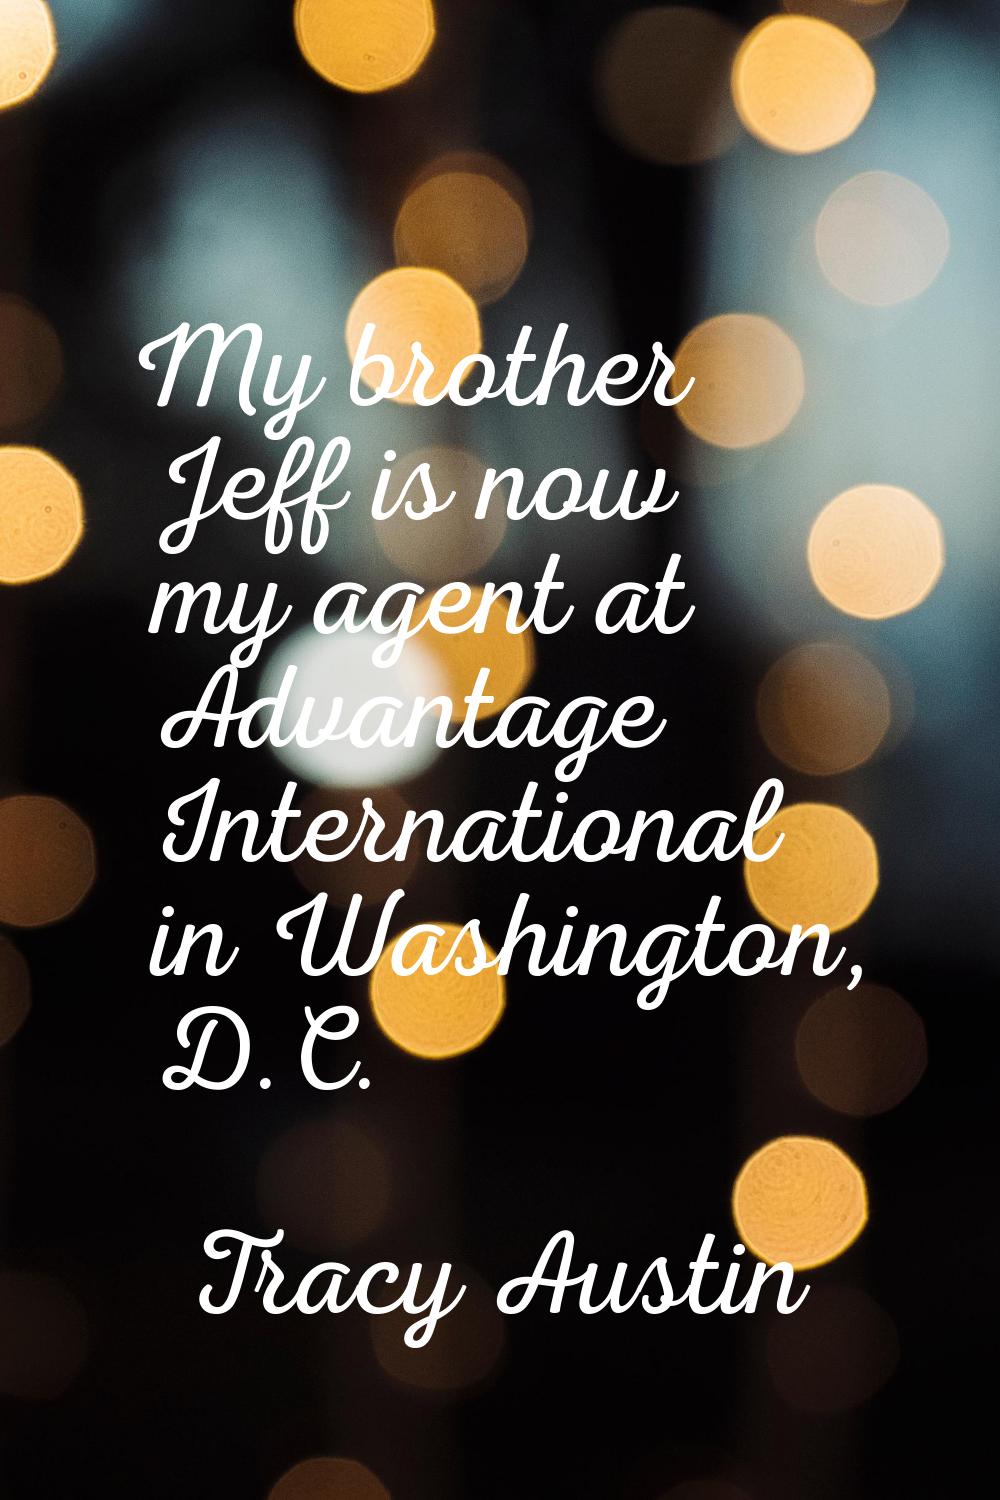 My brother Jeff is now my agent at Advantage International in Washington, D.C.